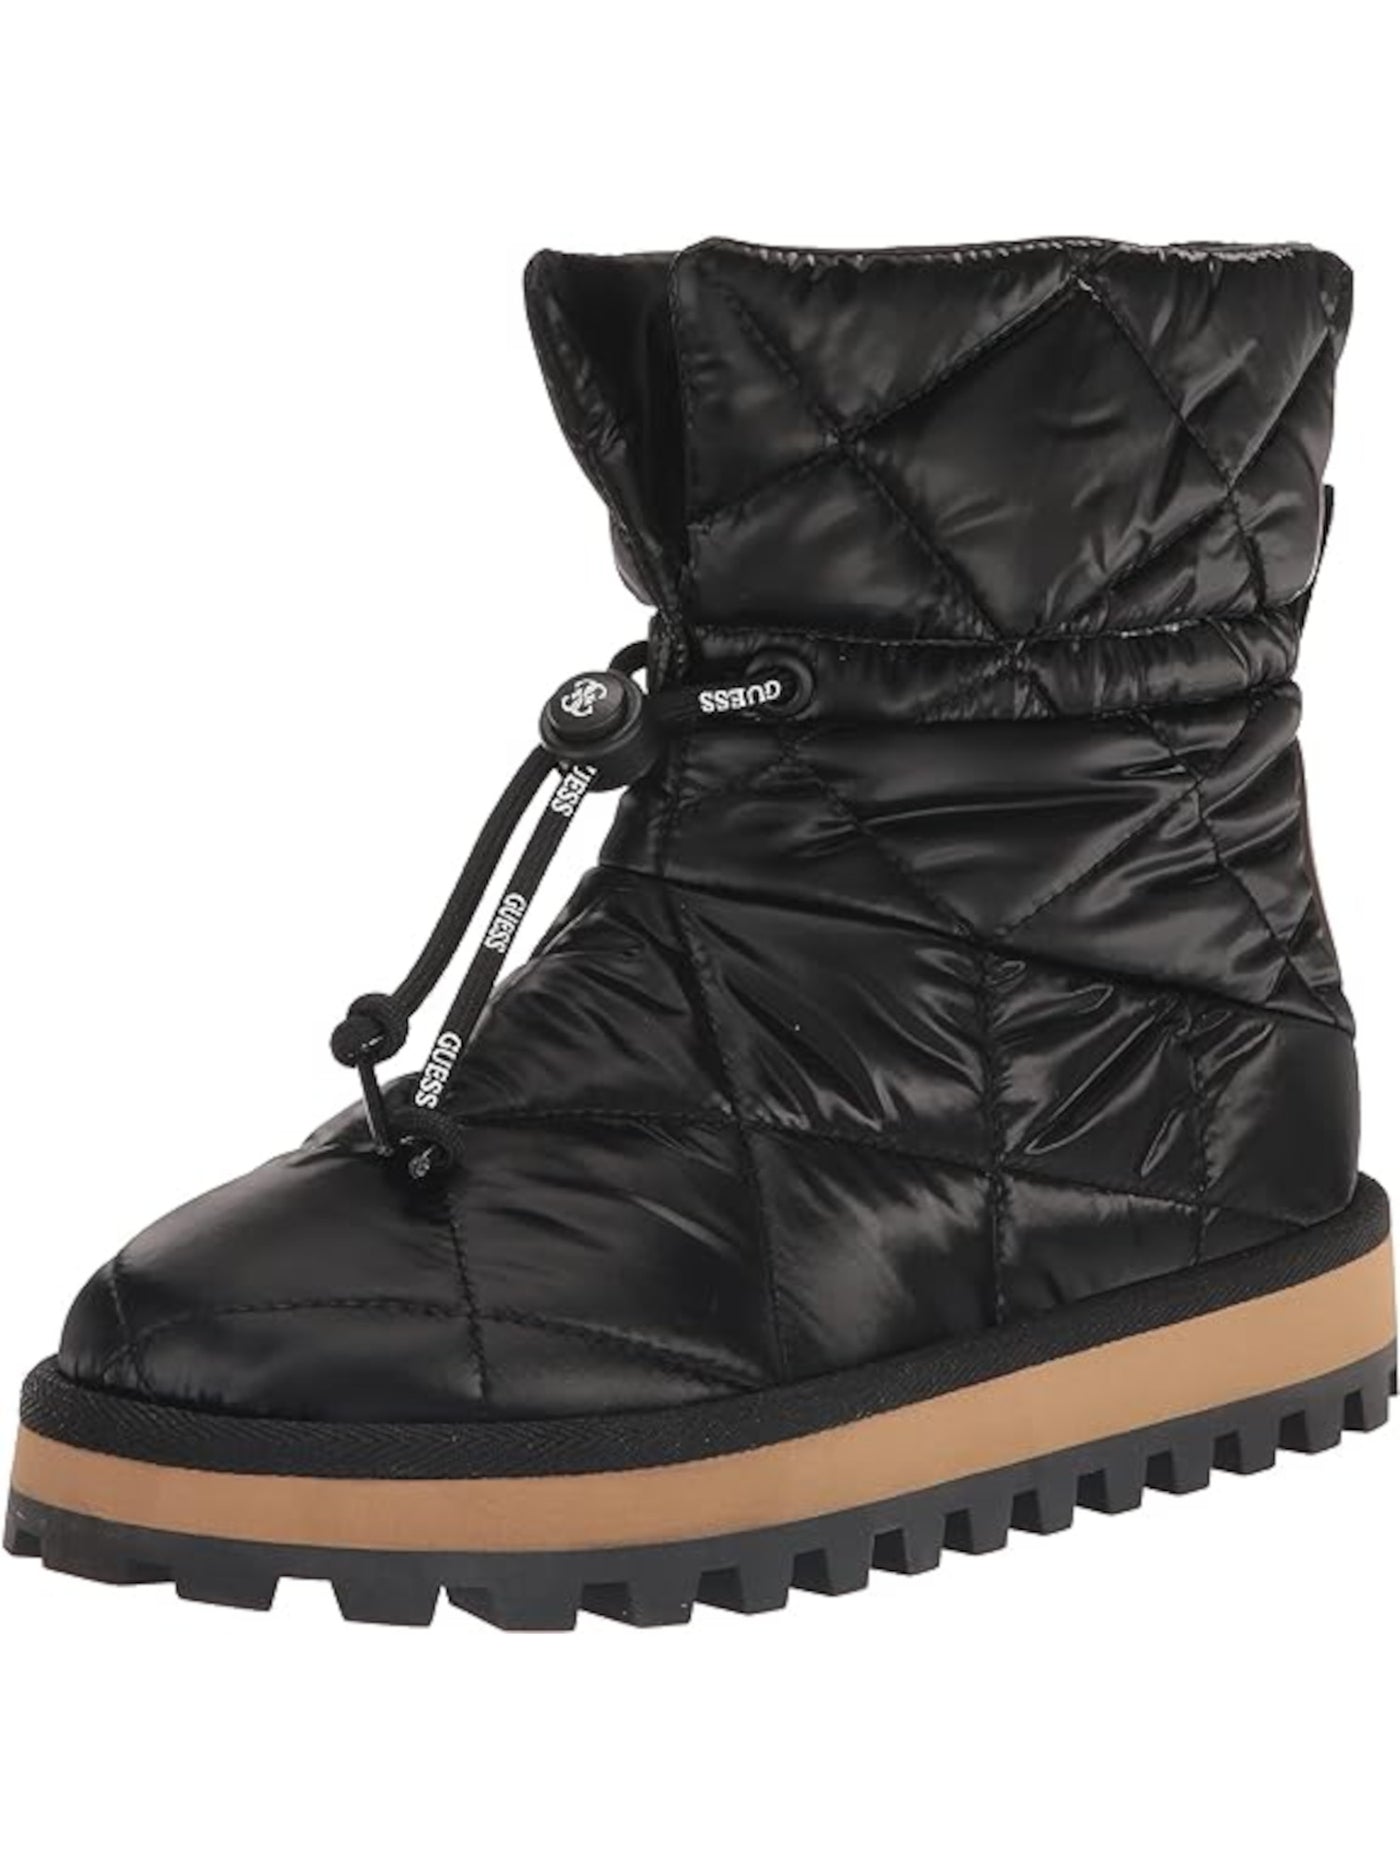 GUESS Womens Black Quilted Leian Round Toe Winter Boots 9 M